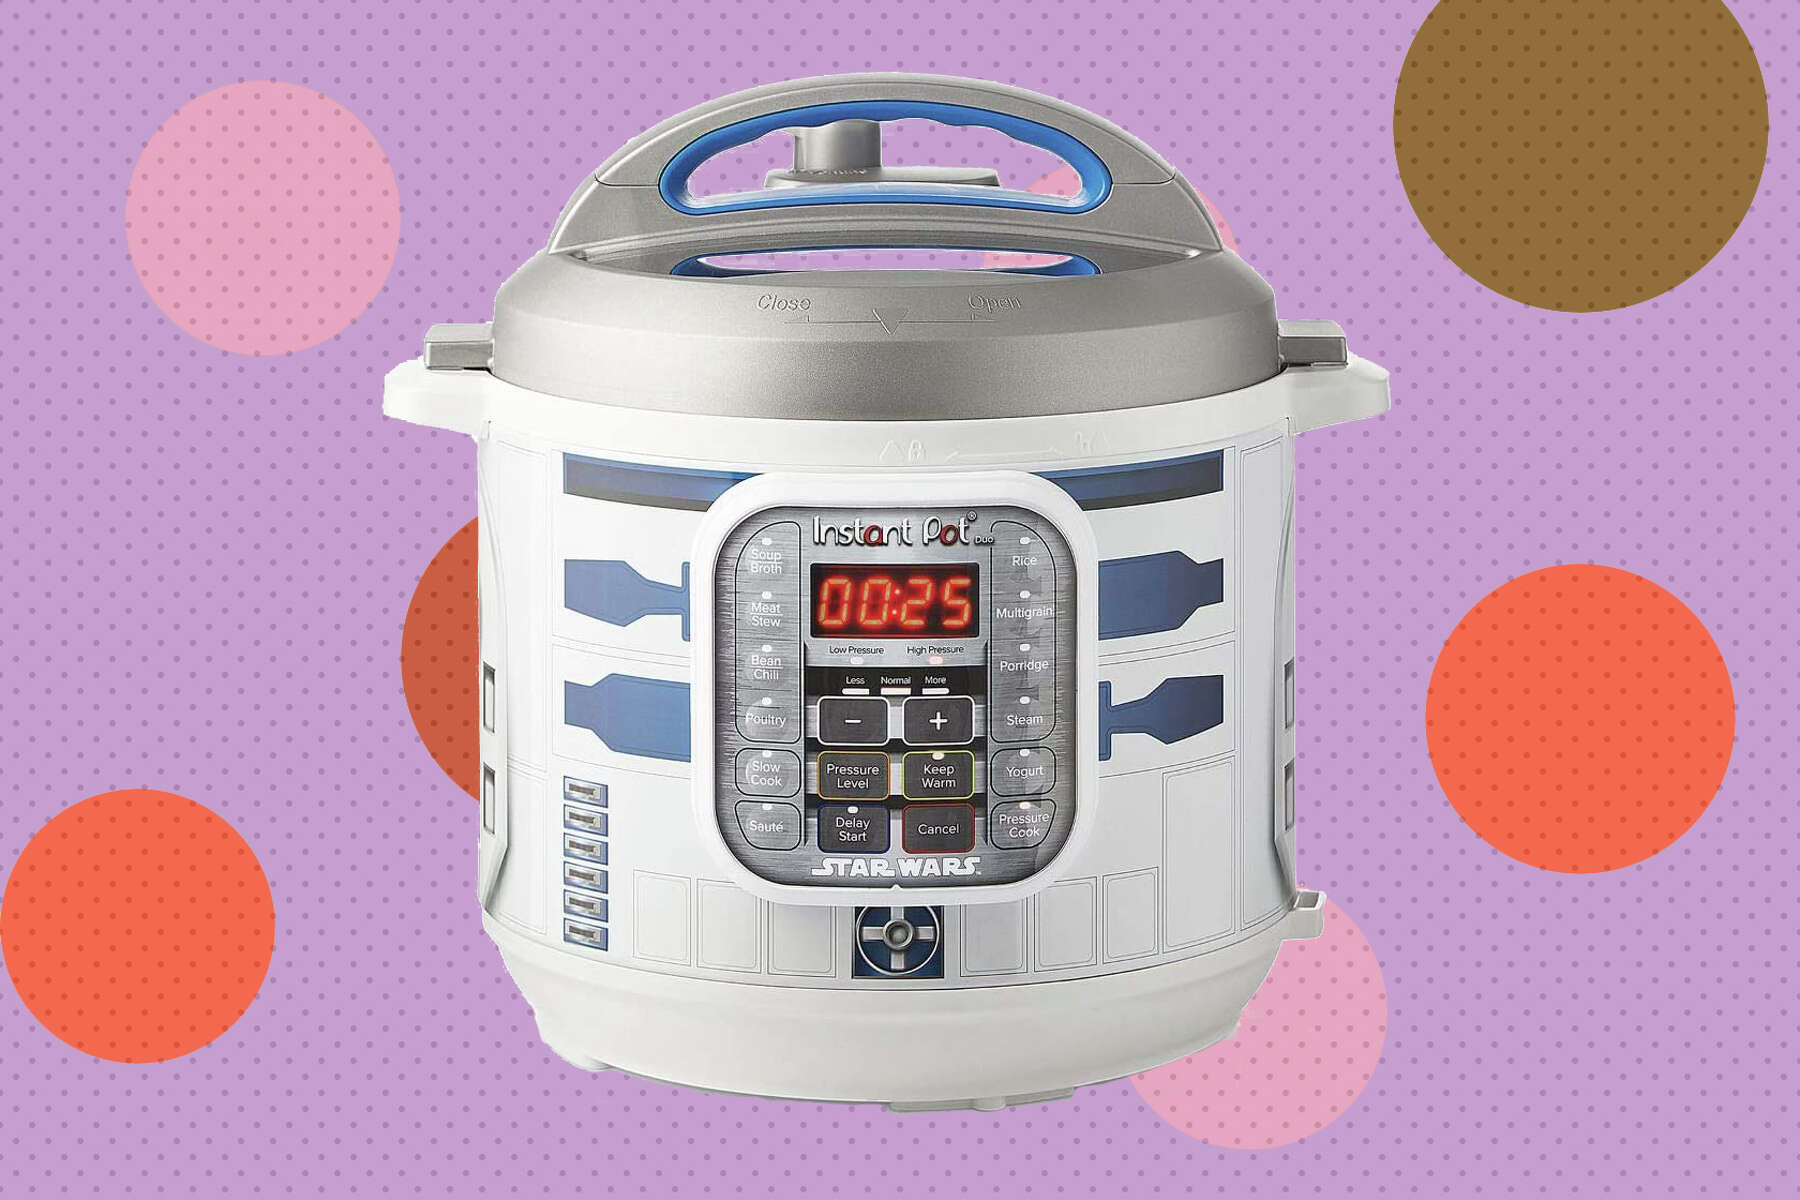 Star Wars R2D2/Darth Vader Instant Pot Cookers: $60 ahead of May